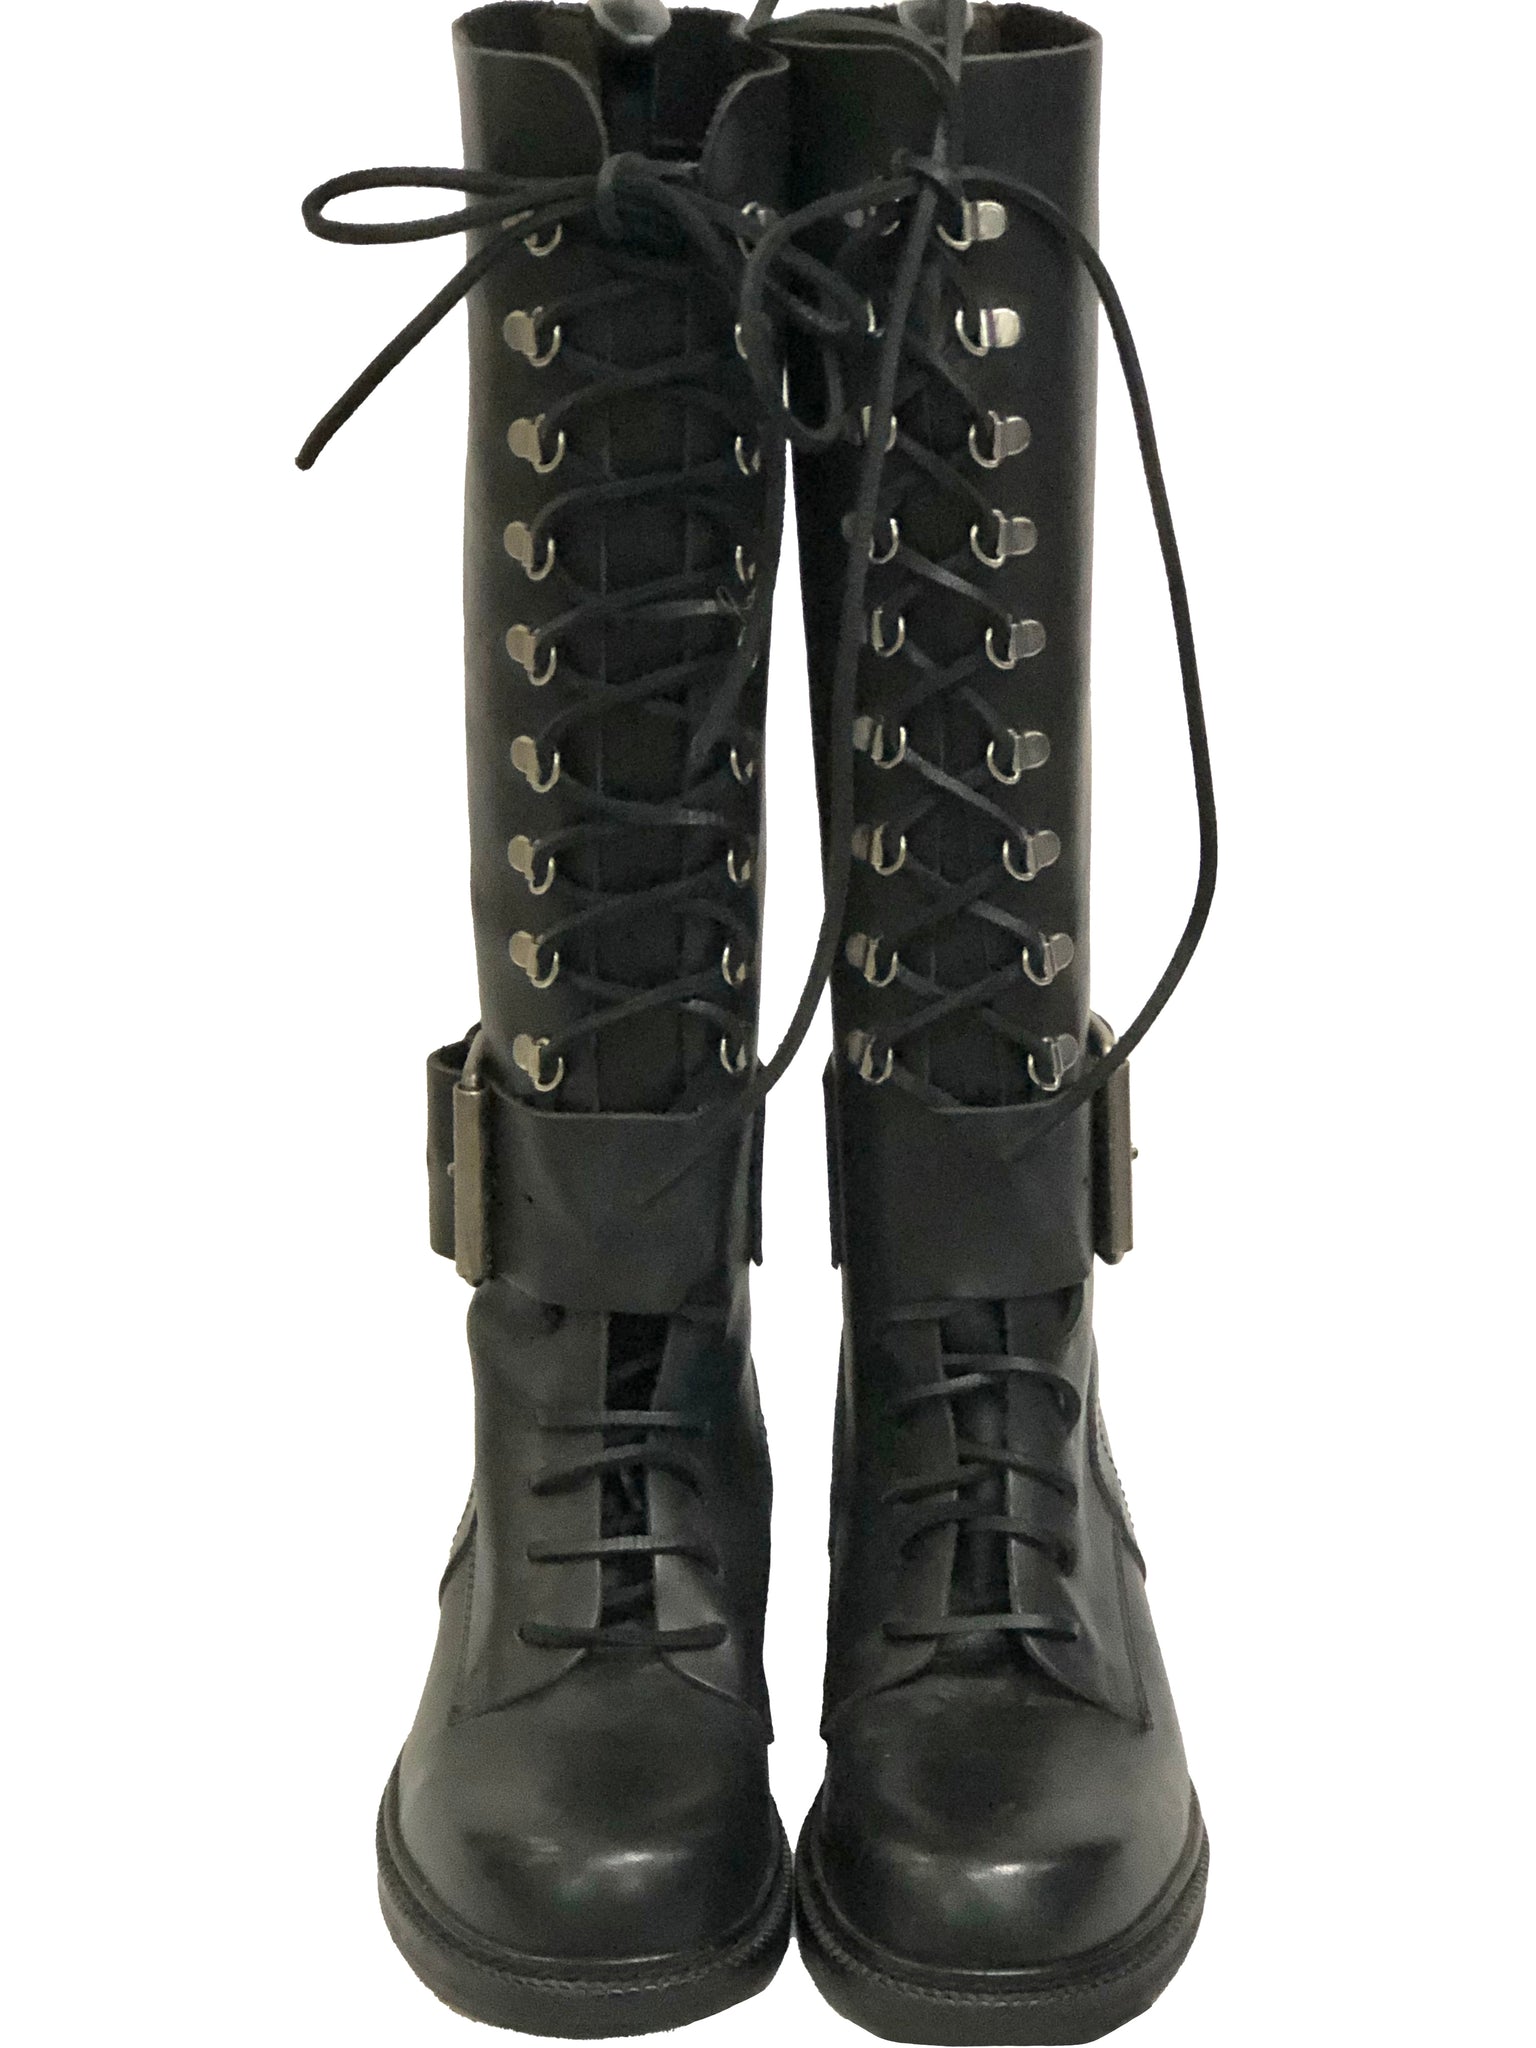 Dirk Bikkembergs 90s Tall Lace Up Boots with Buckle – THE WAY WE WORE